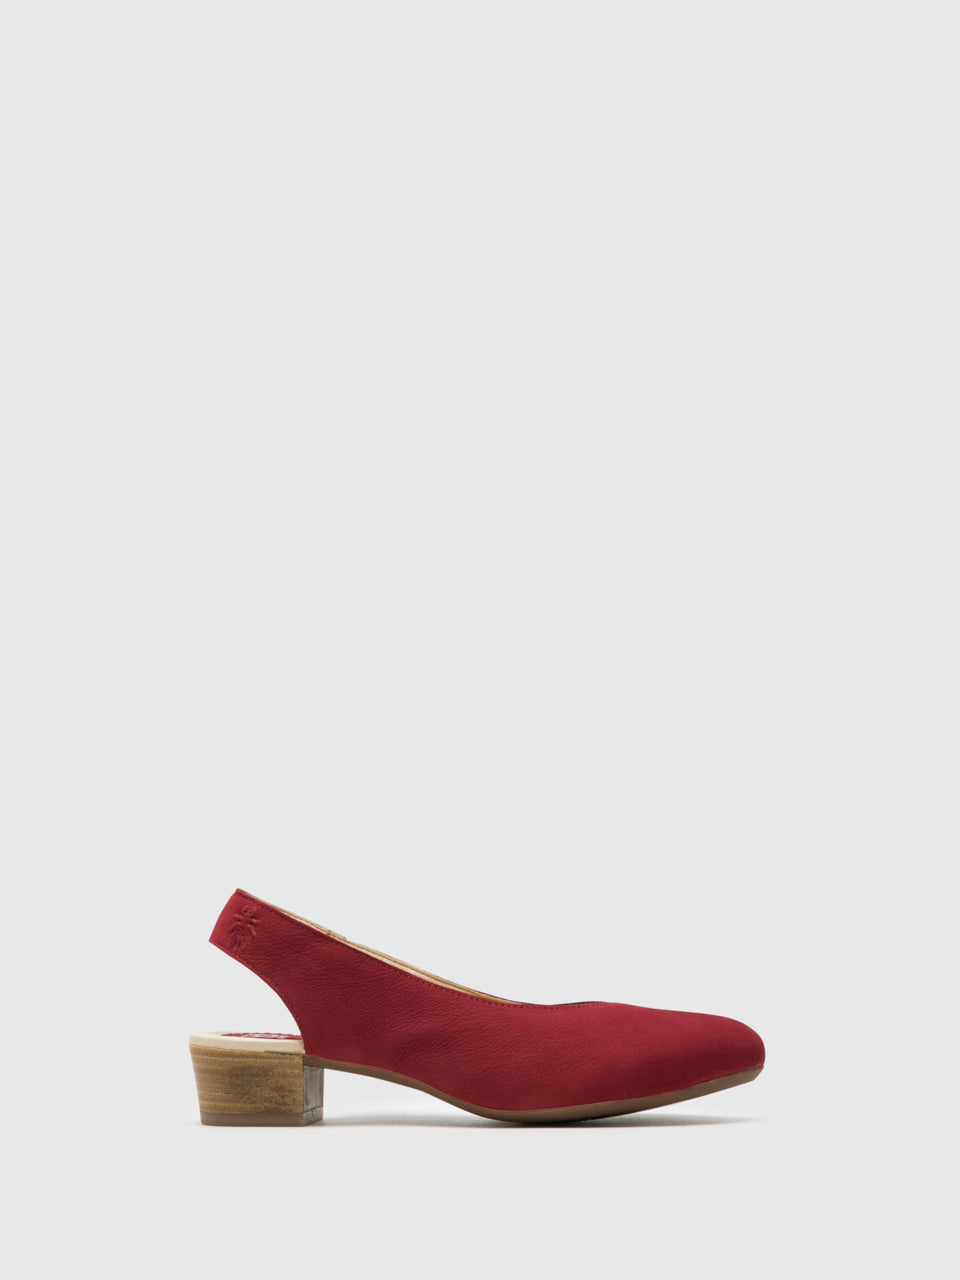 Fly London Red Sling-Back Pumps Shoes